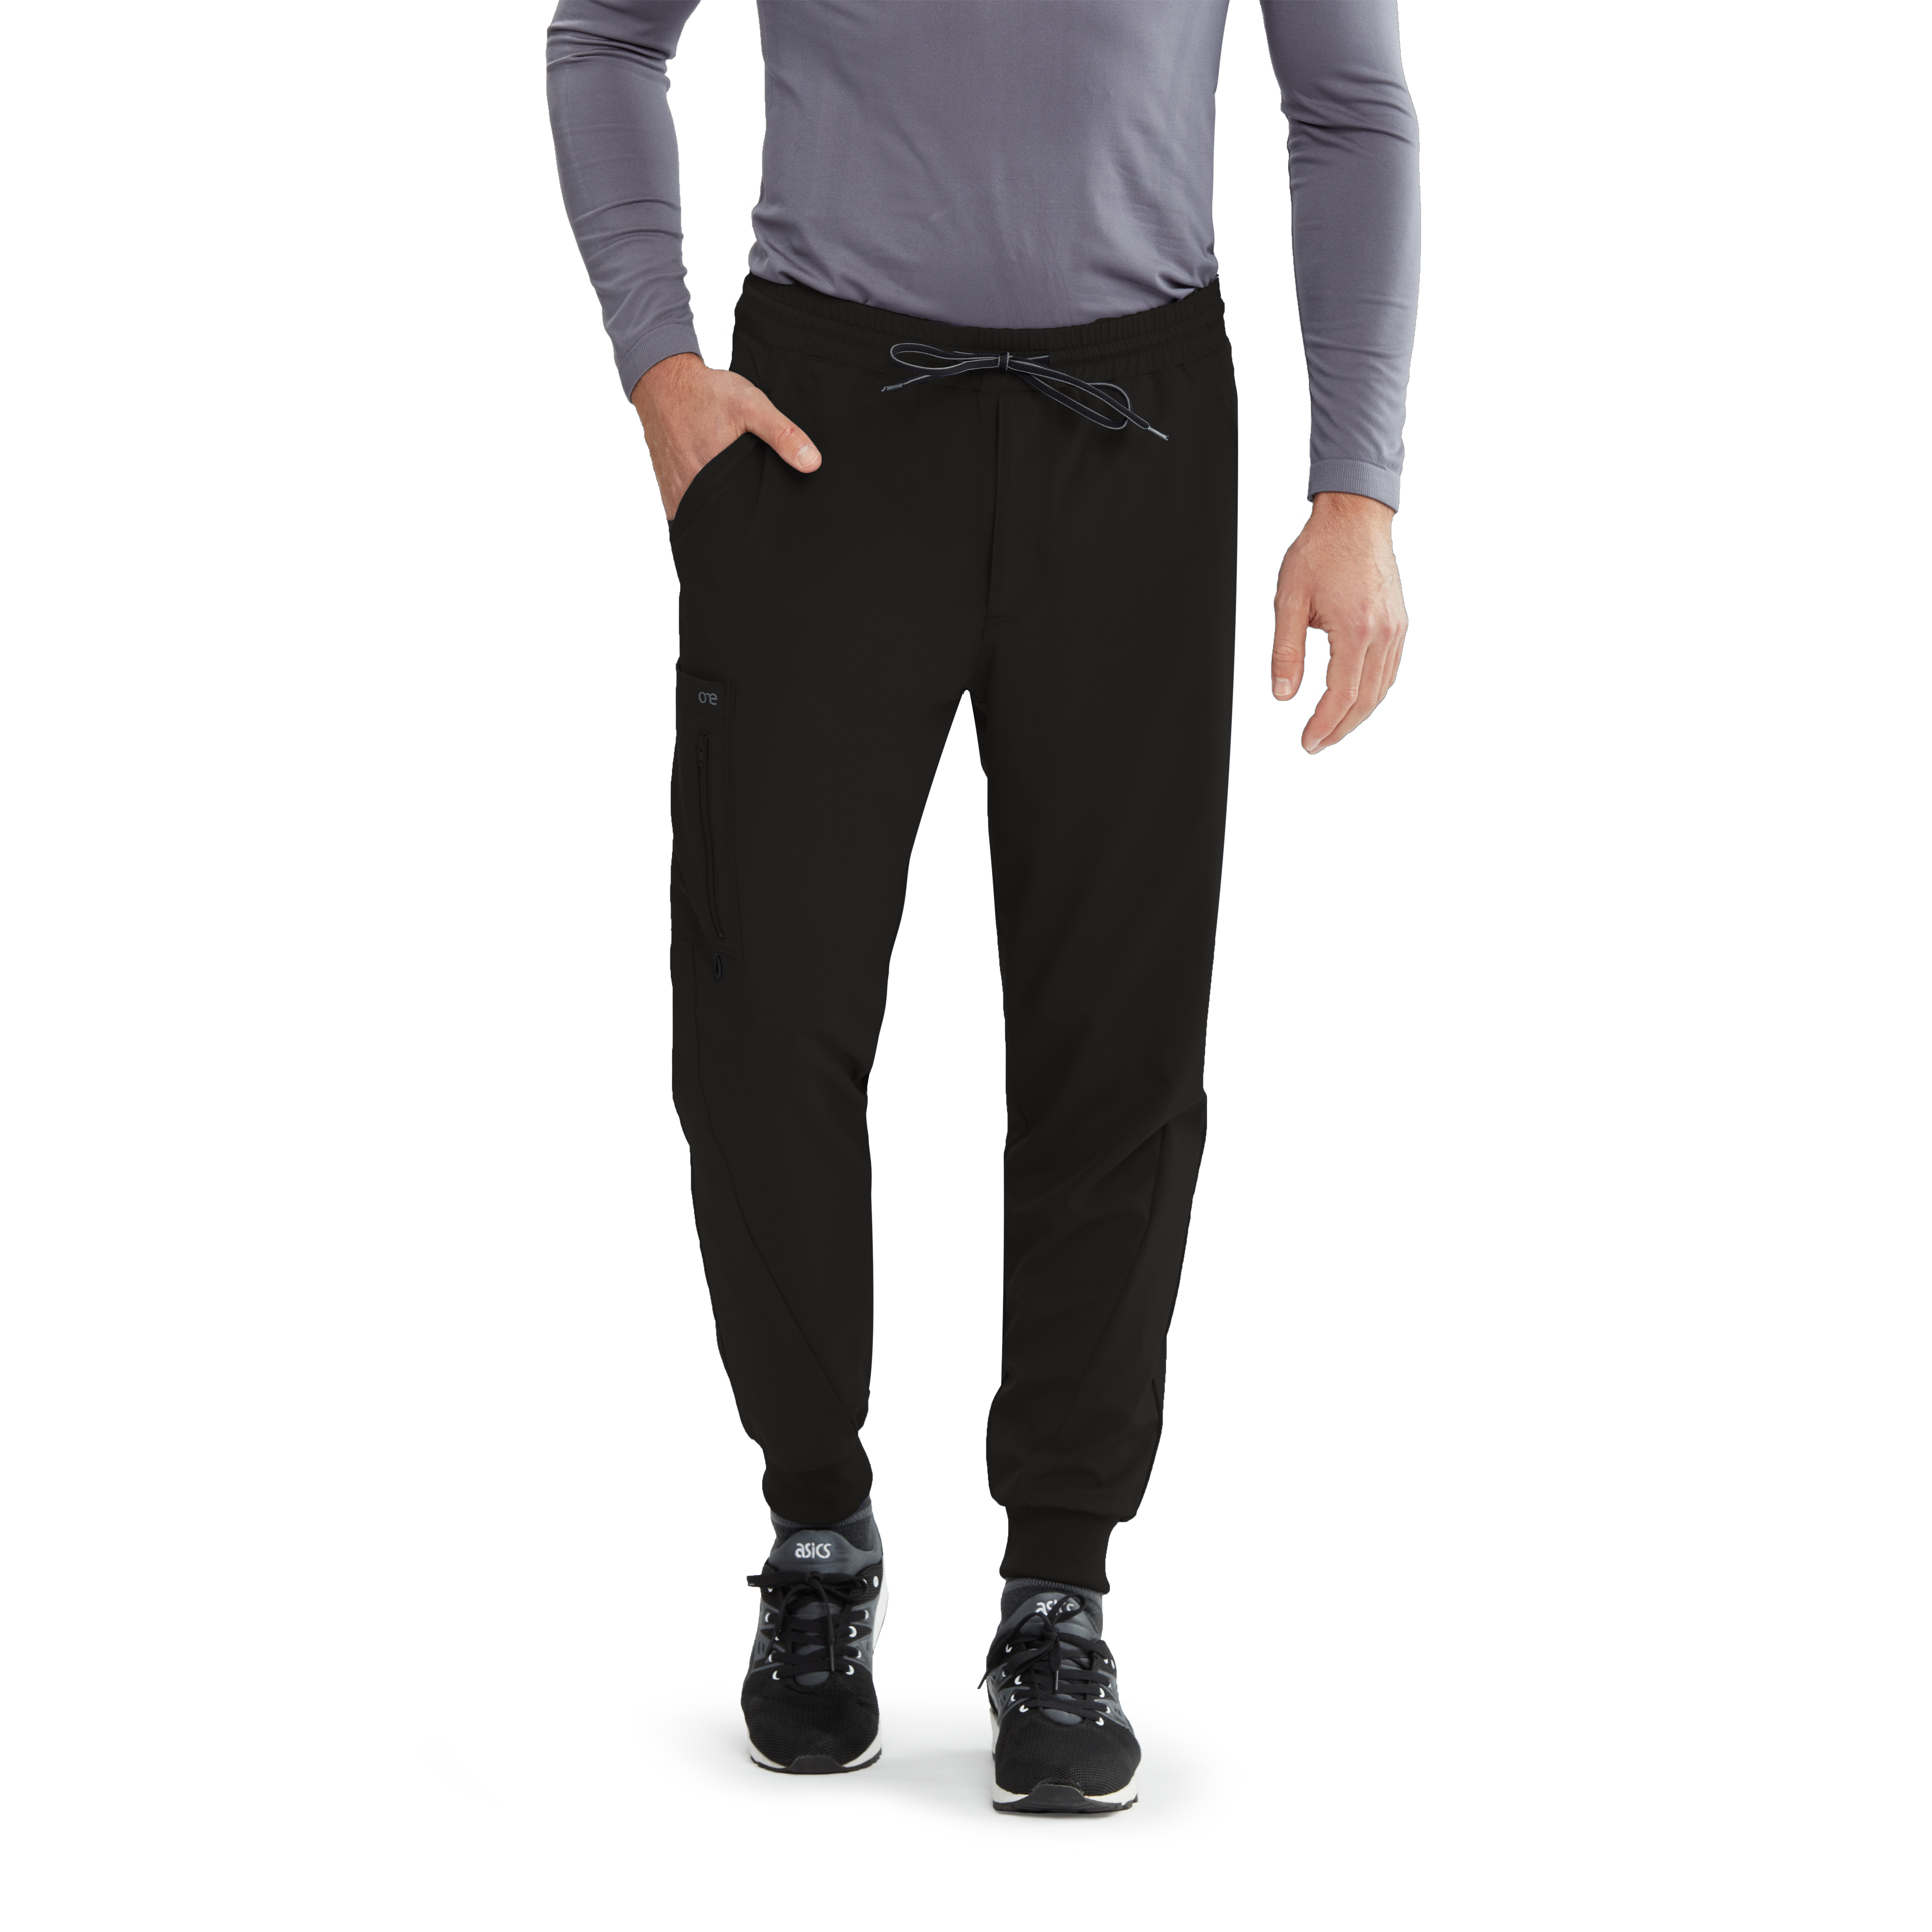 Barco One Vortex Jogger-Barco One